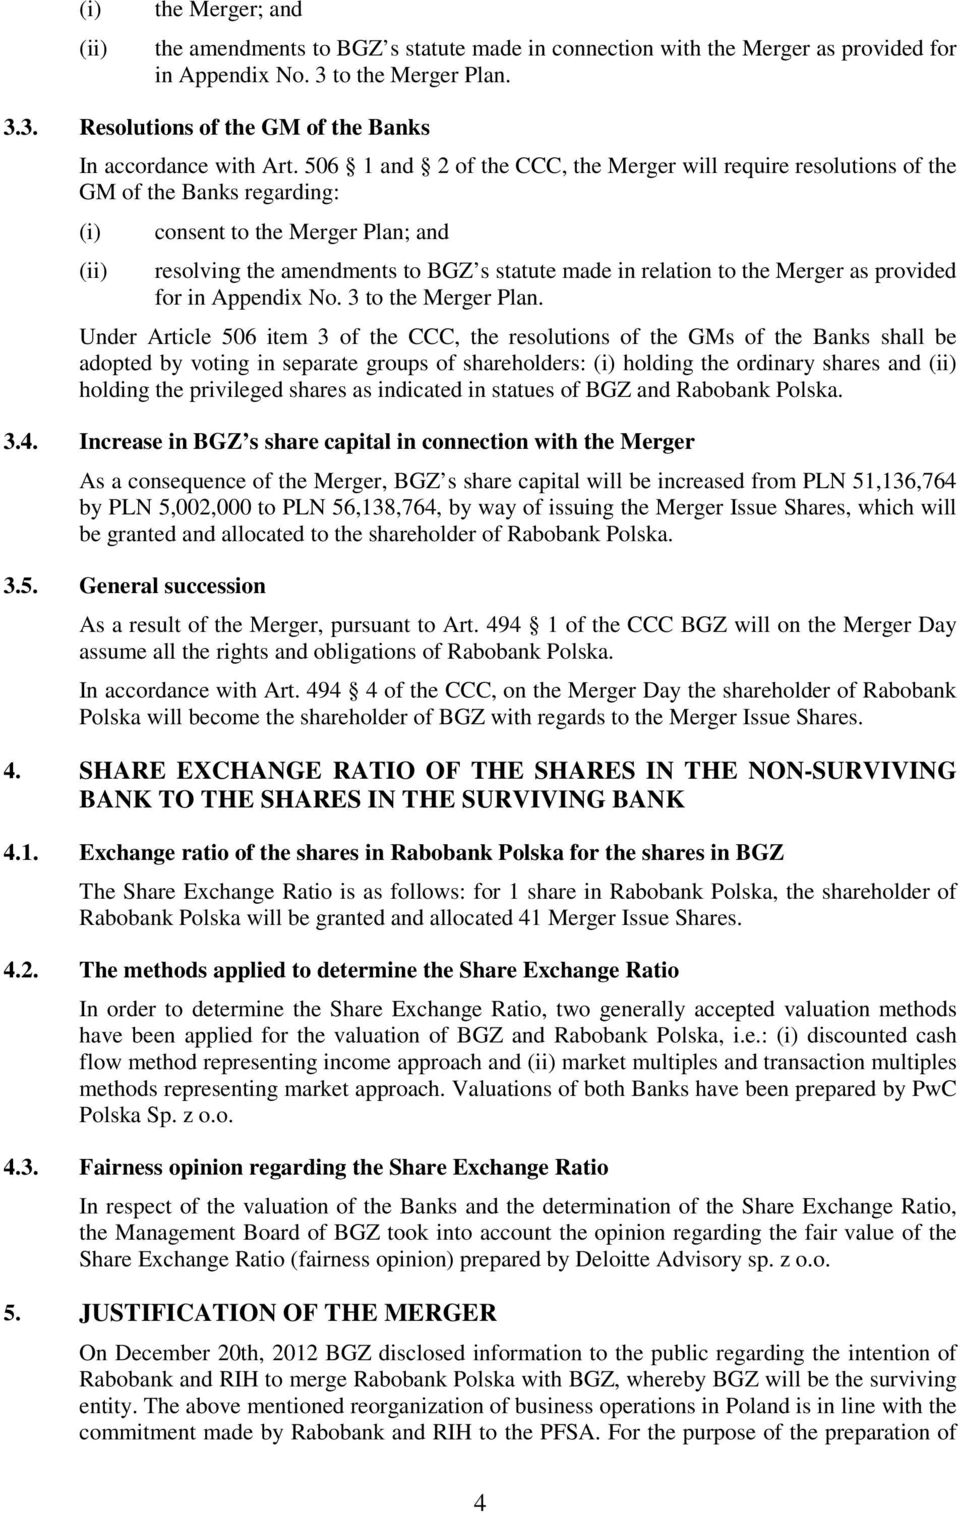 the Merger as provided for in Appendix No. 3 to the Merger Plan.